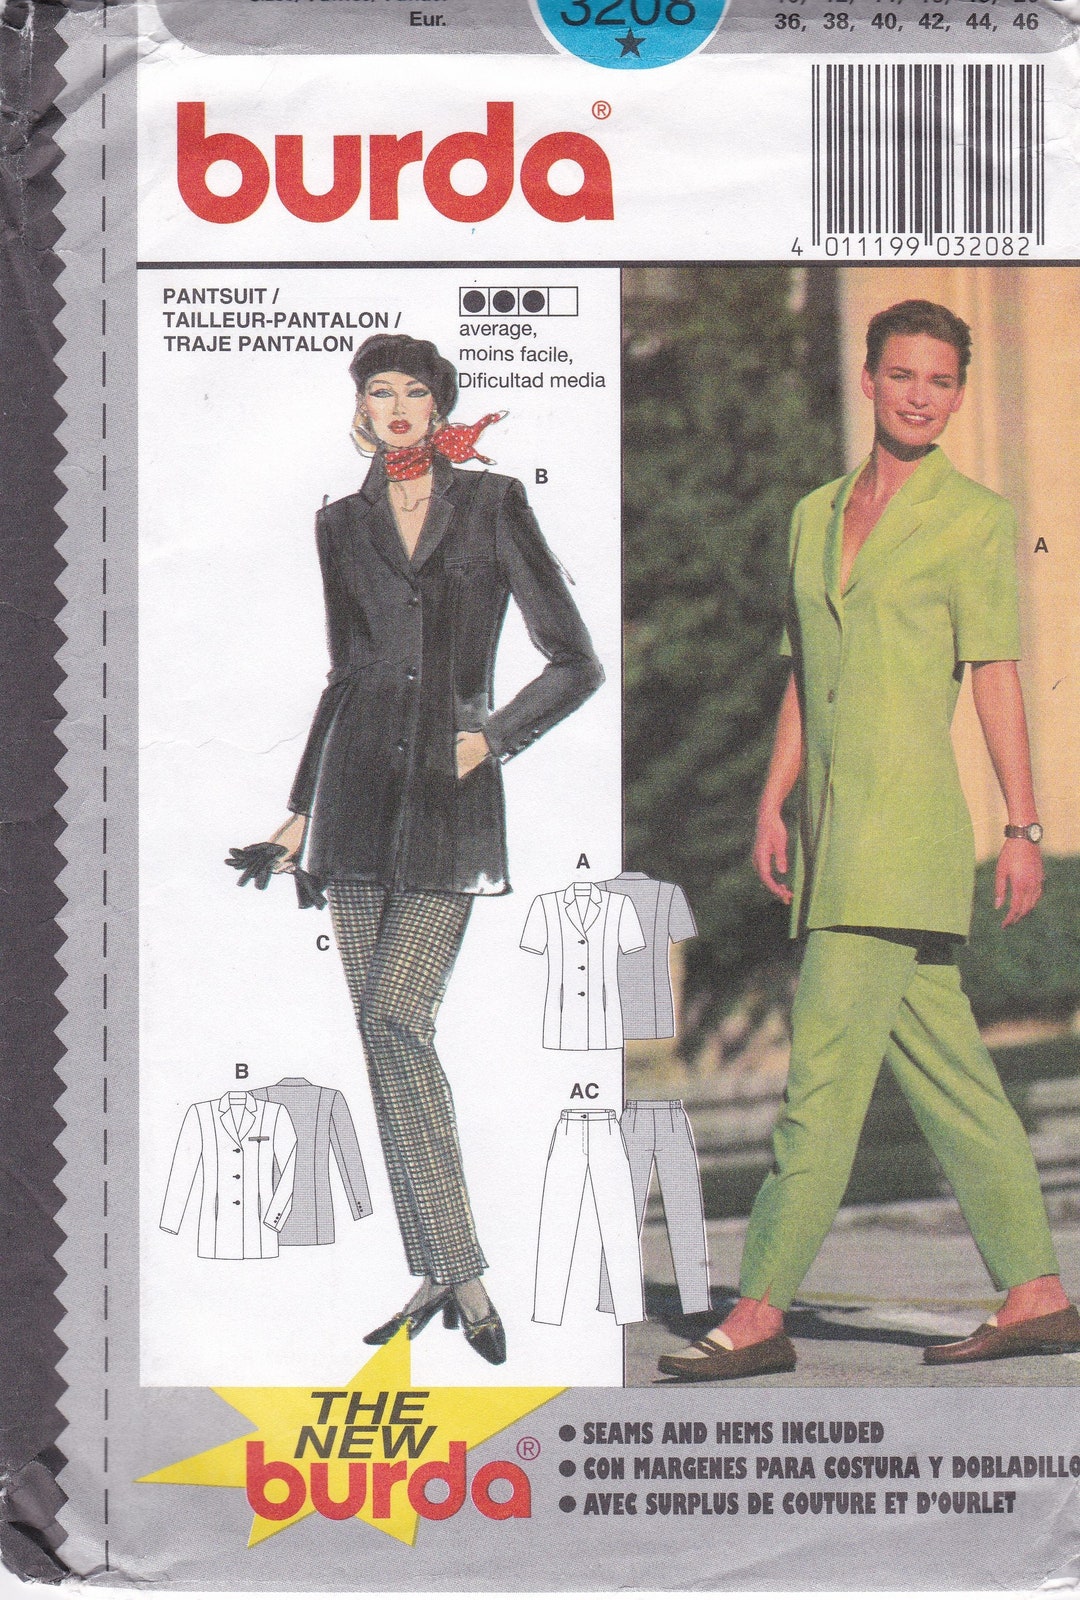 Jacket and Pants Patterns Misses' Size 10 12 14 16 18 20 - Etsy